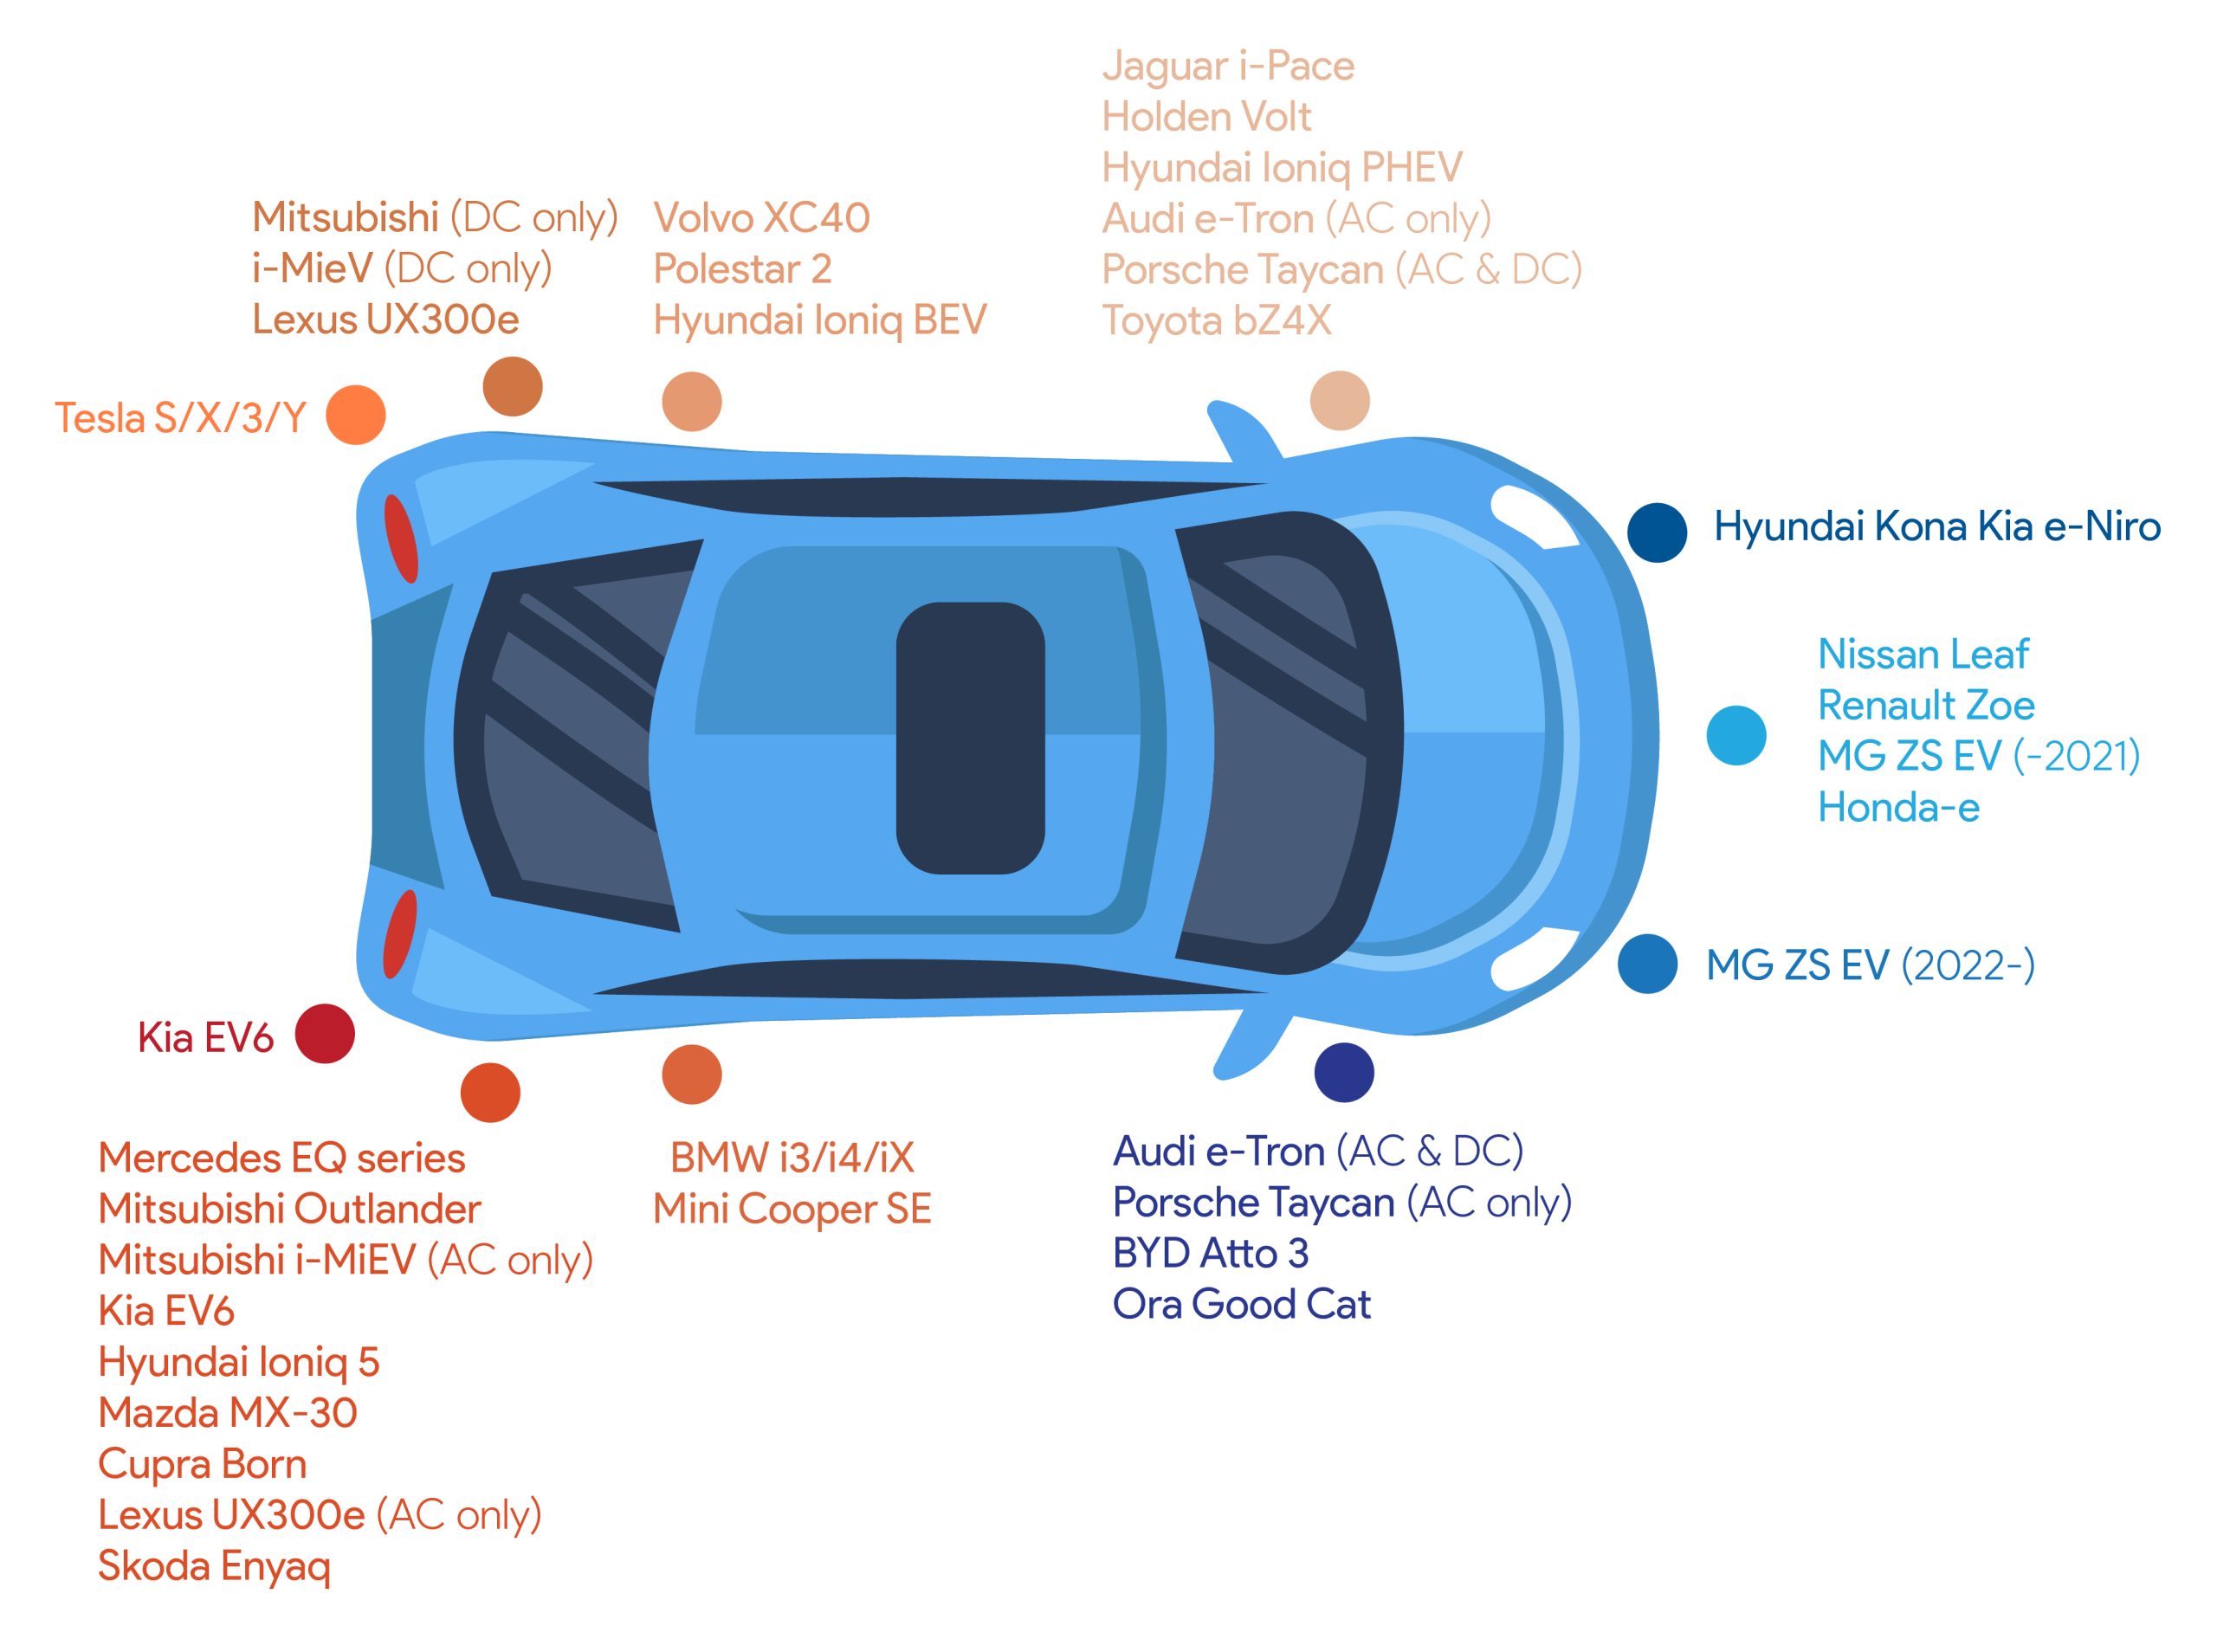 A diagram showing all charger port locations of EVs available in Australia